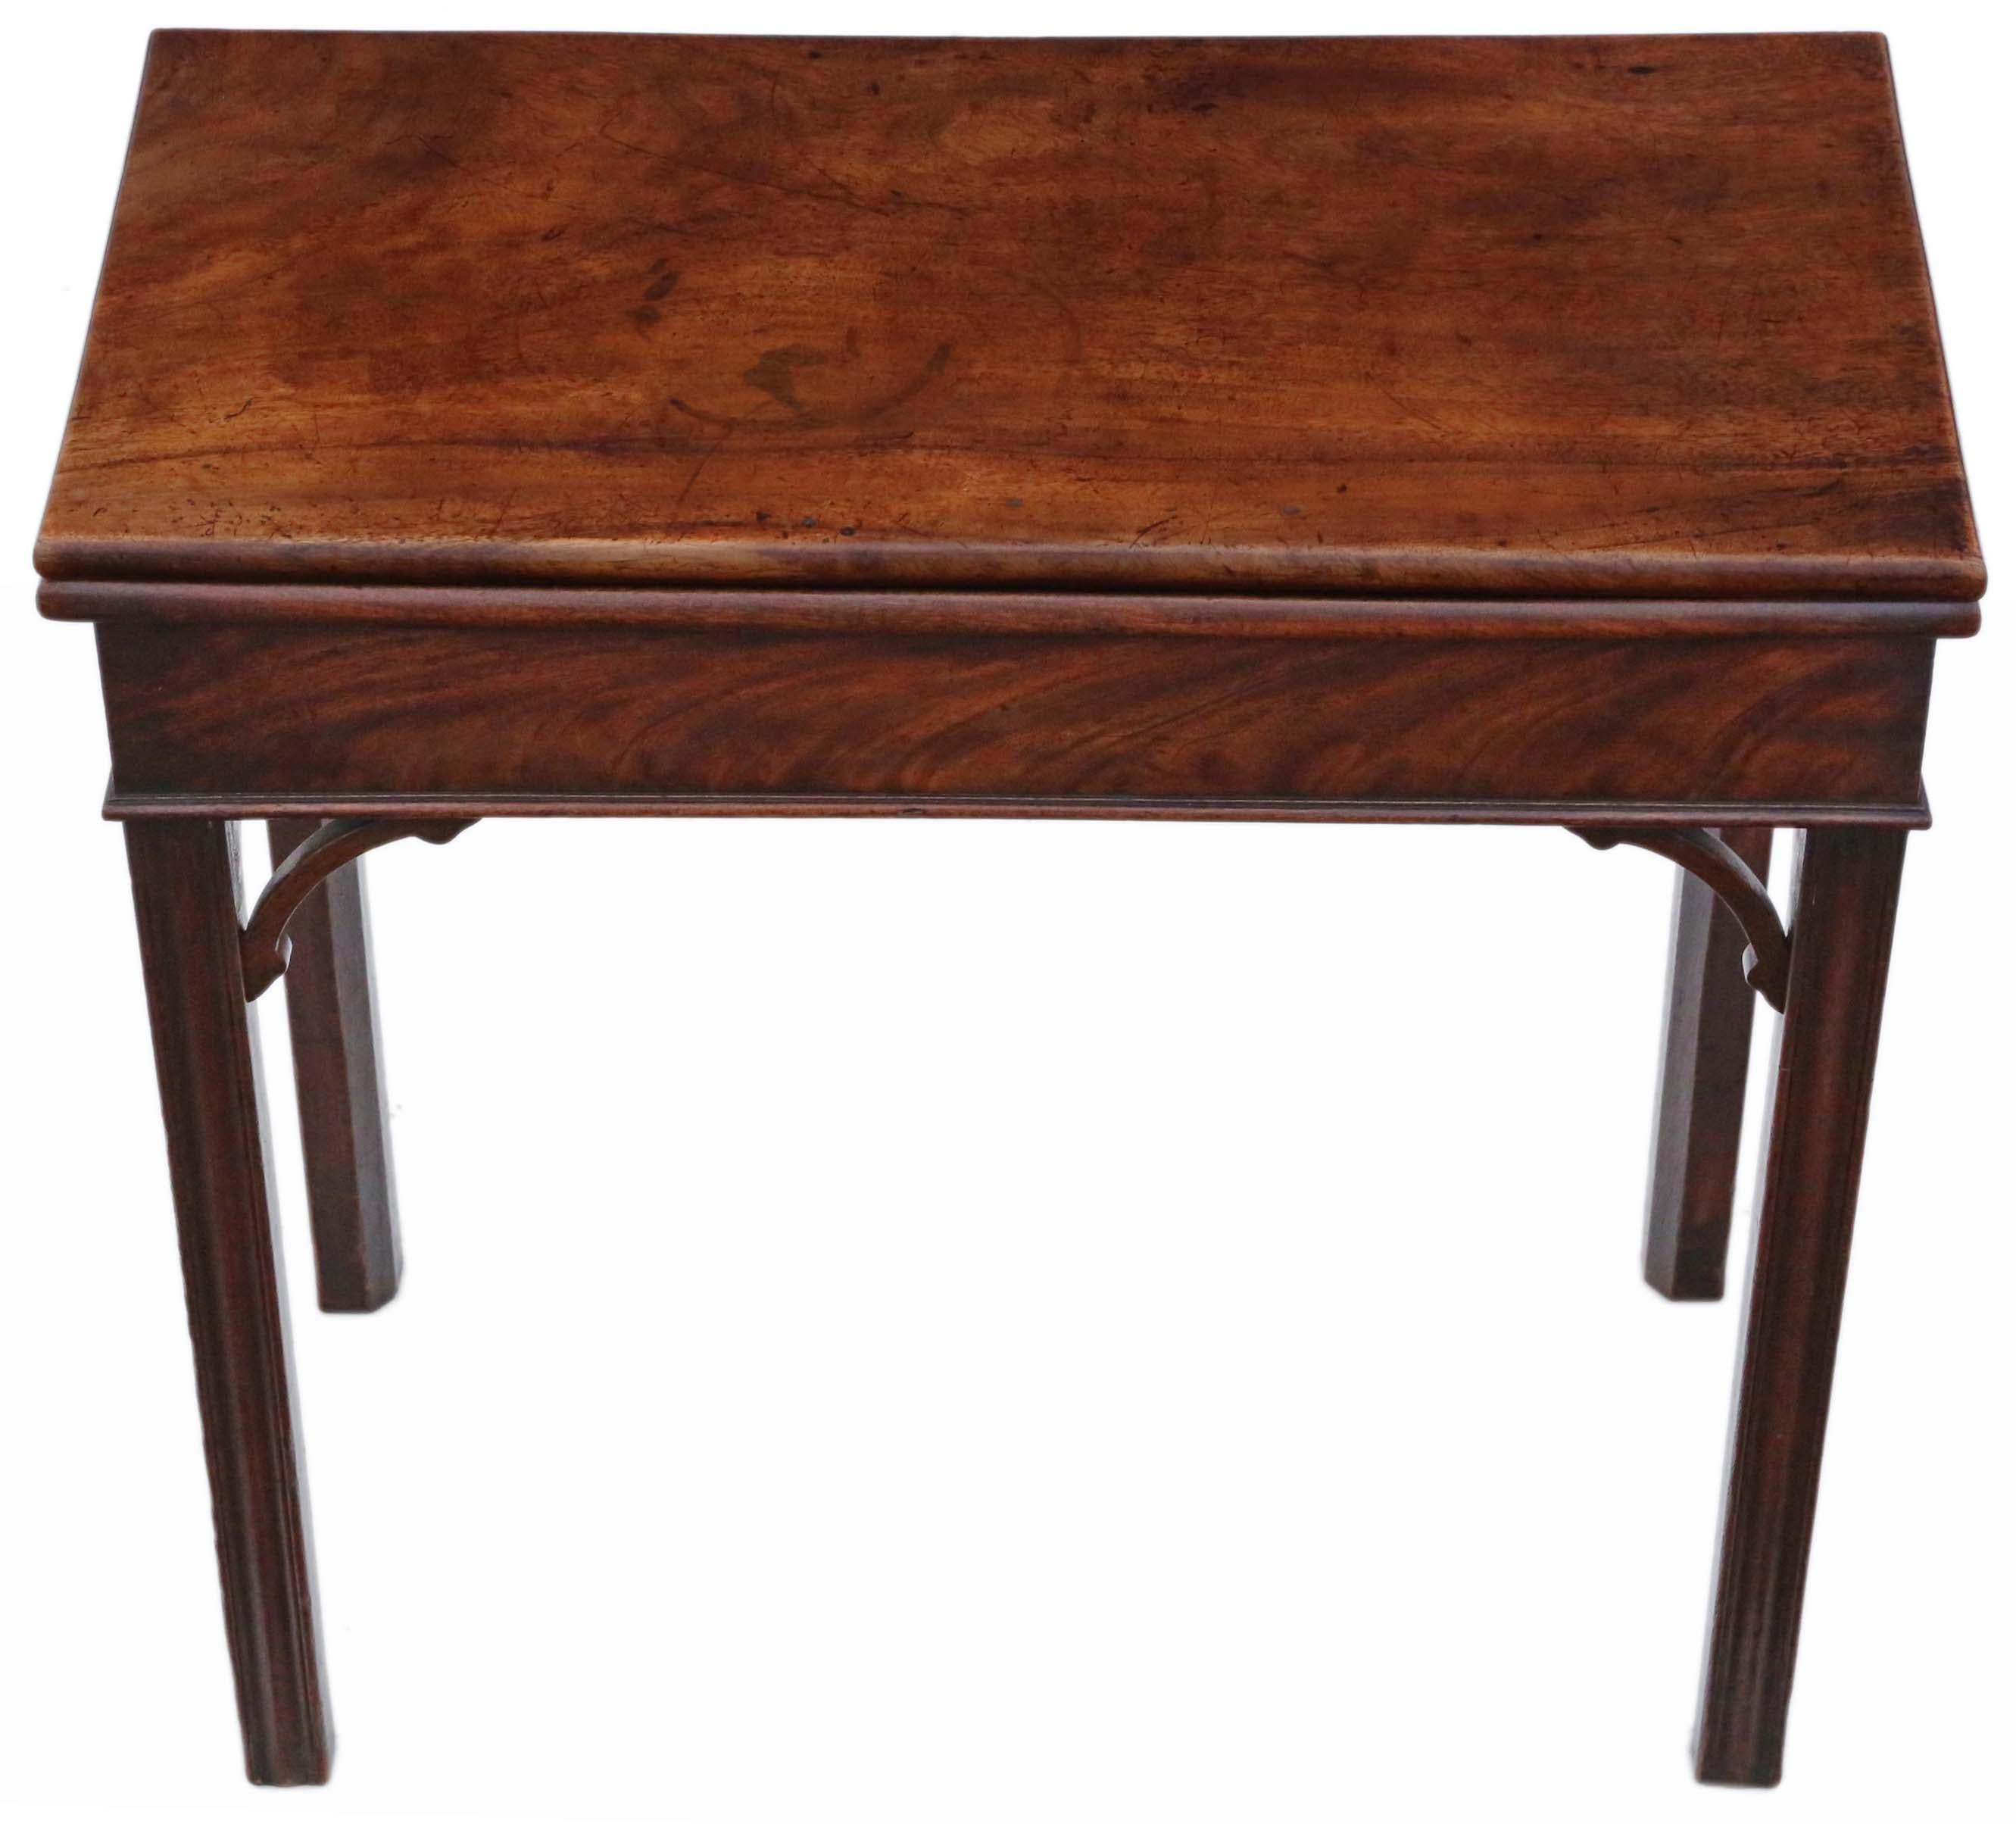 Antique quality Georgian 18th Century C1790 mahogany folding card tea console table. Lovely small compact dimensions.

No loose joints.

The table has a wonderful colour and patina.

Lovely age charm and character, would look amazing in the